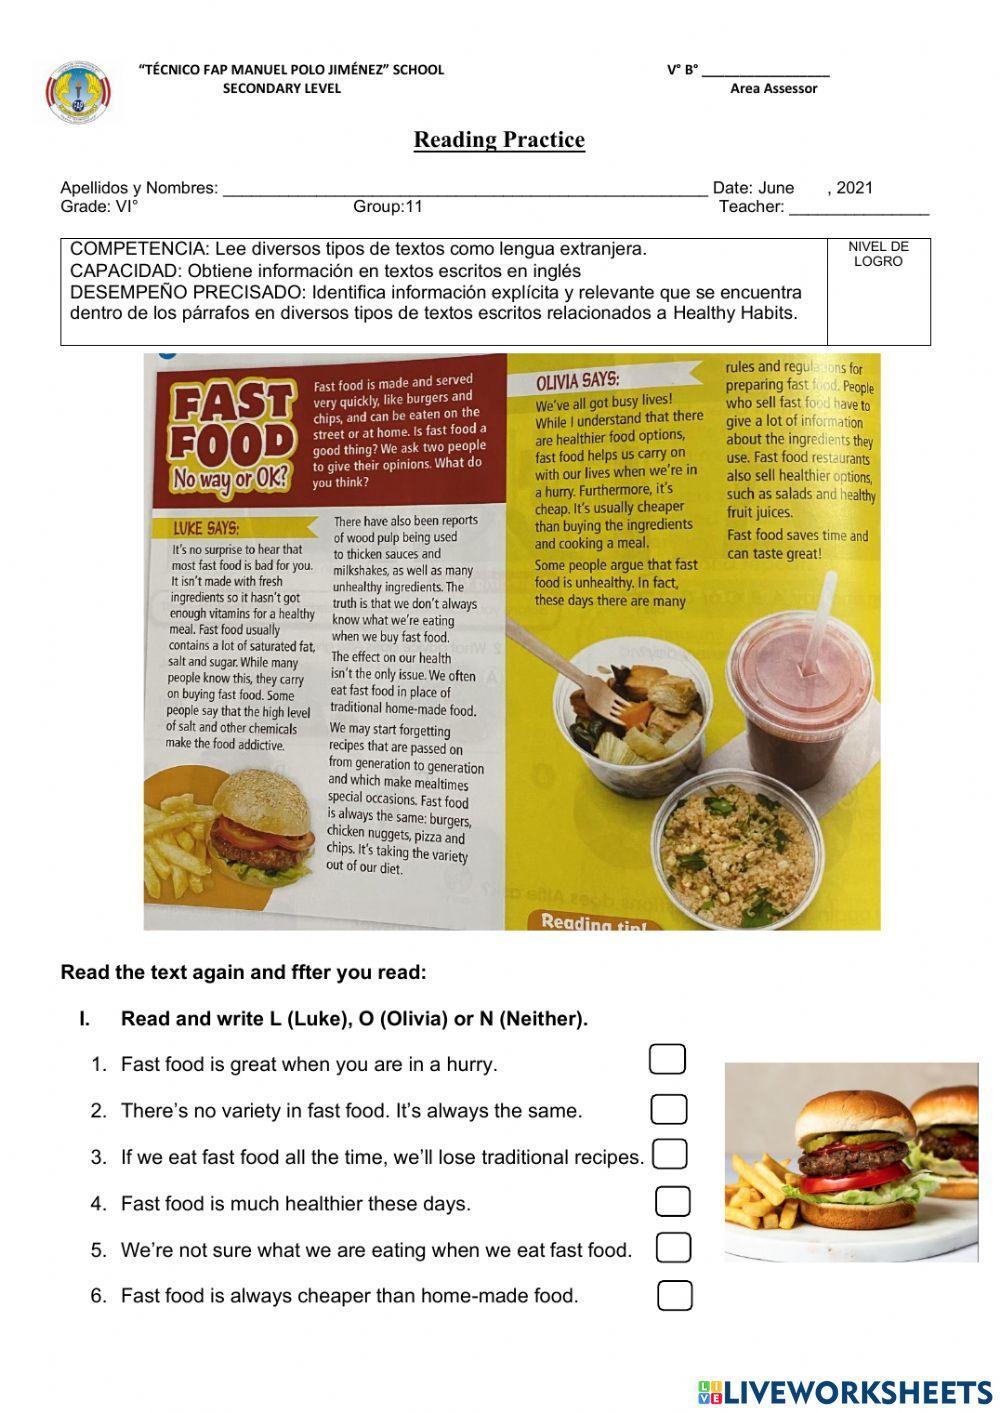 Reading Practice FAST FOOD